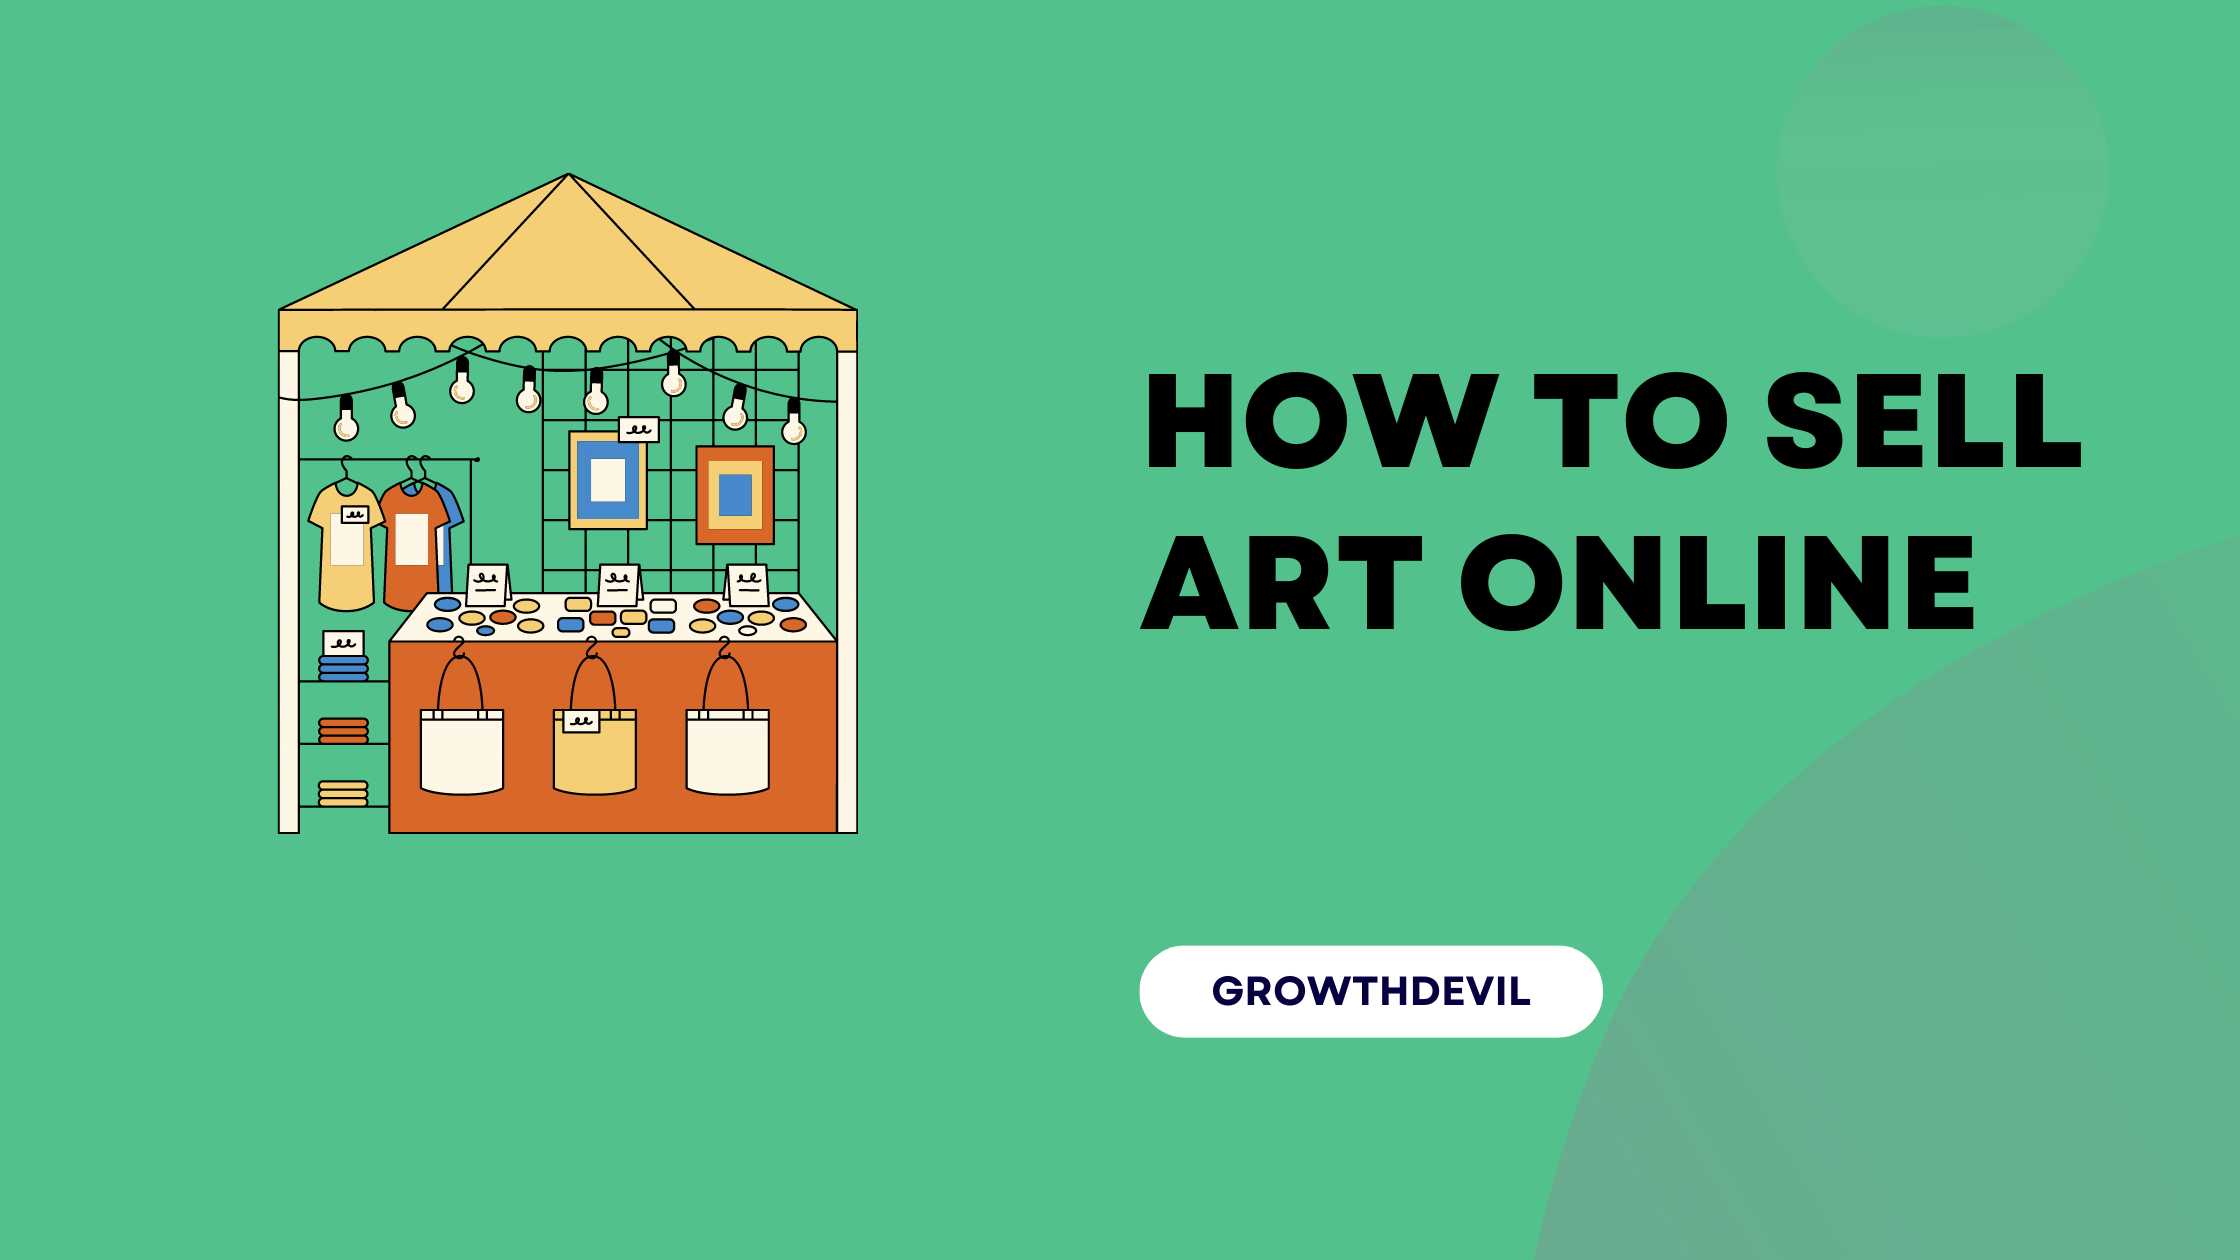 How To Sell Art Online - GrowthDevil